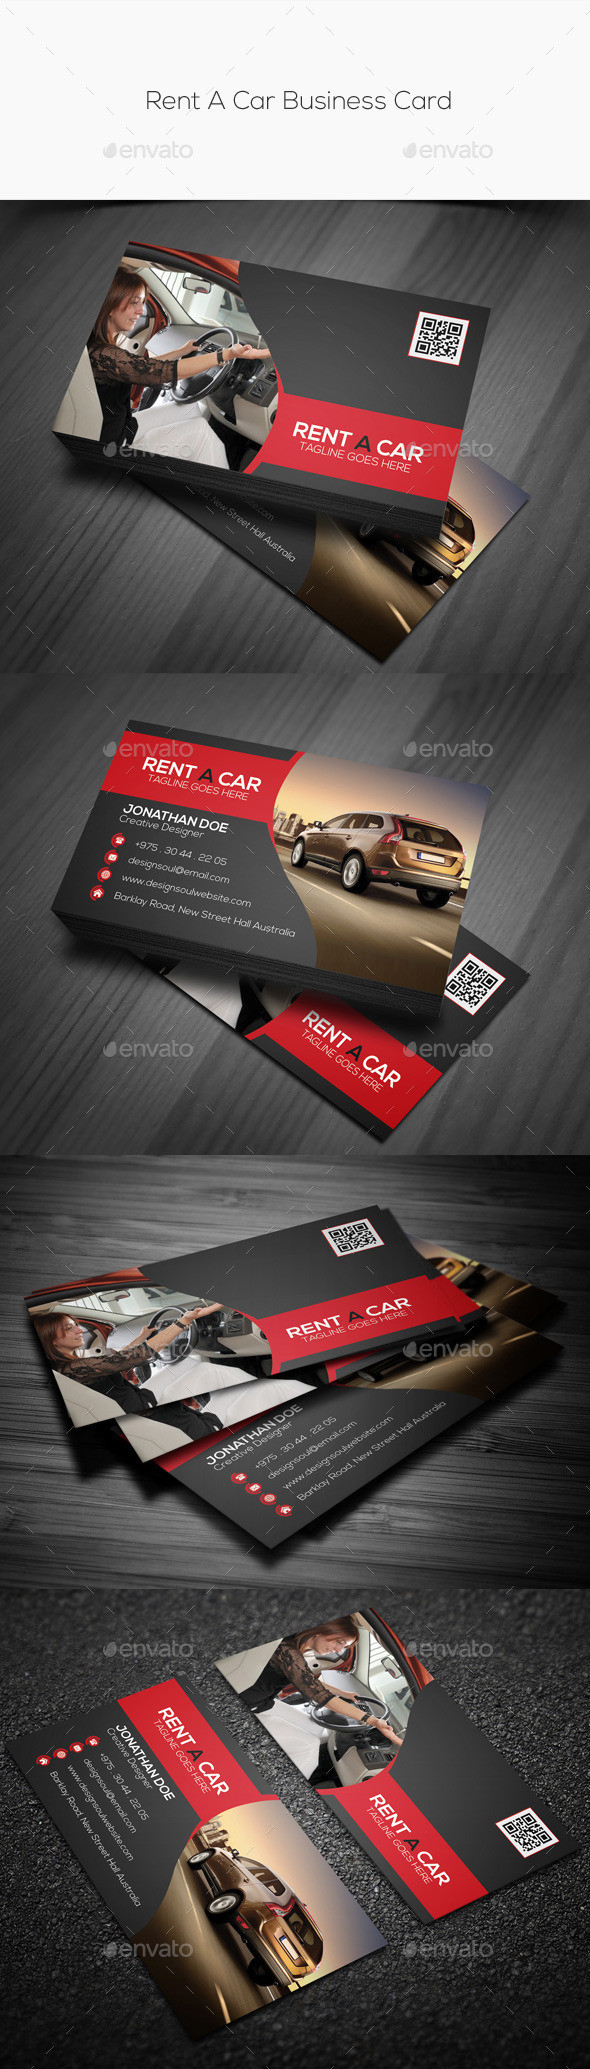 Rent a car business card preview